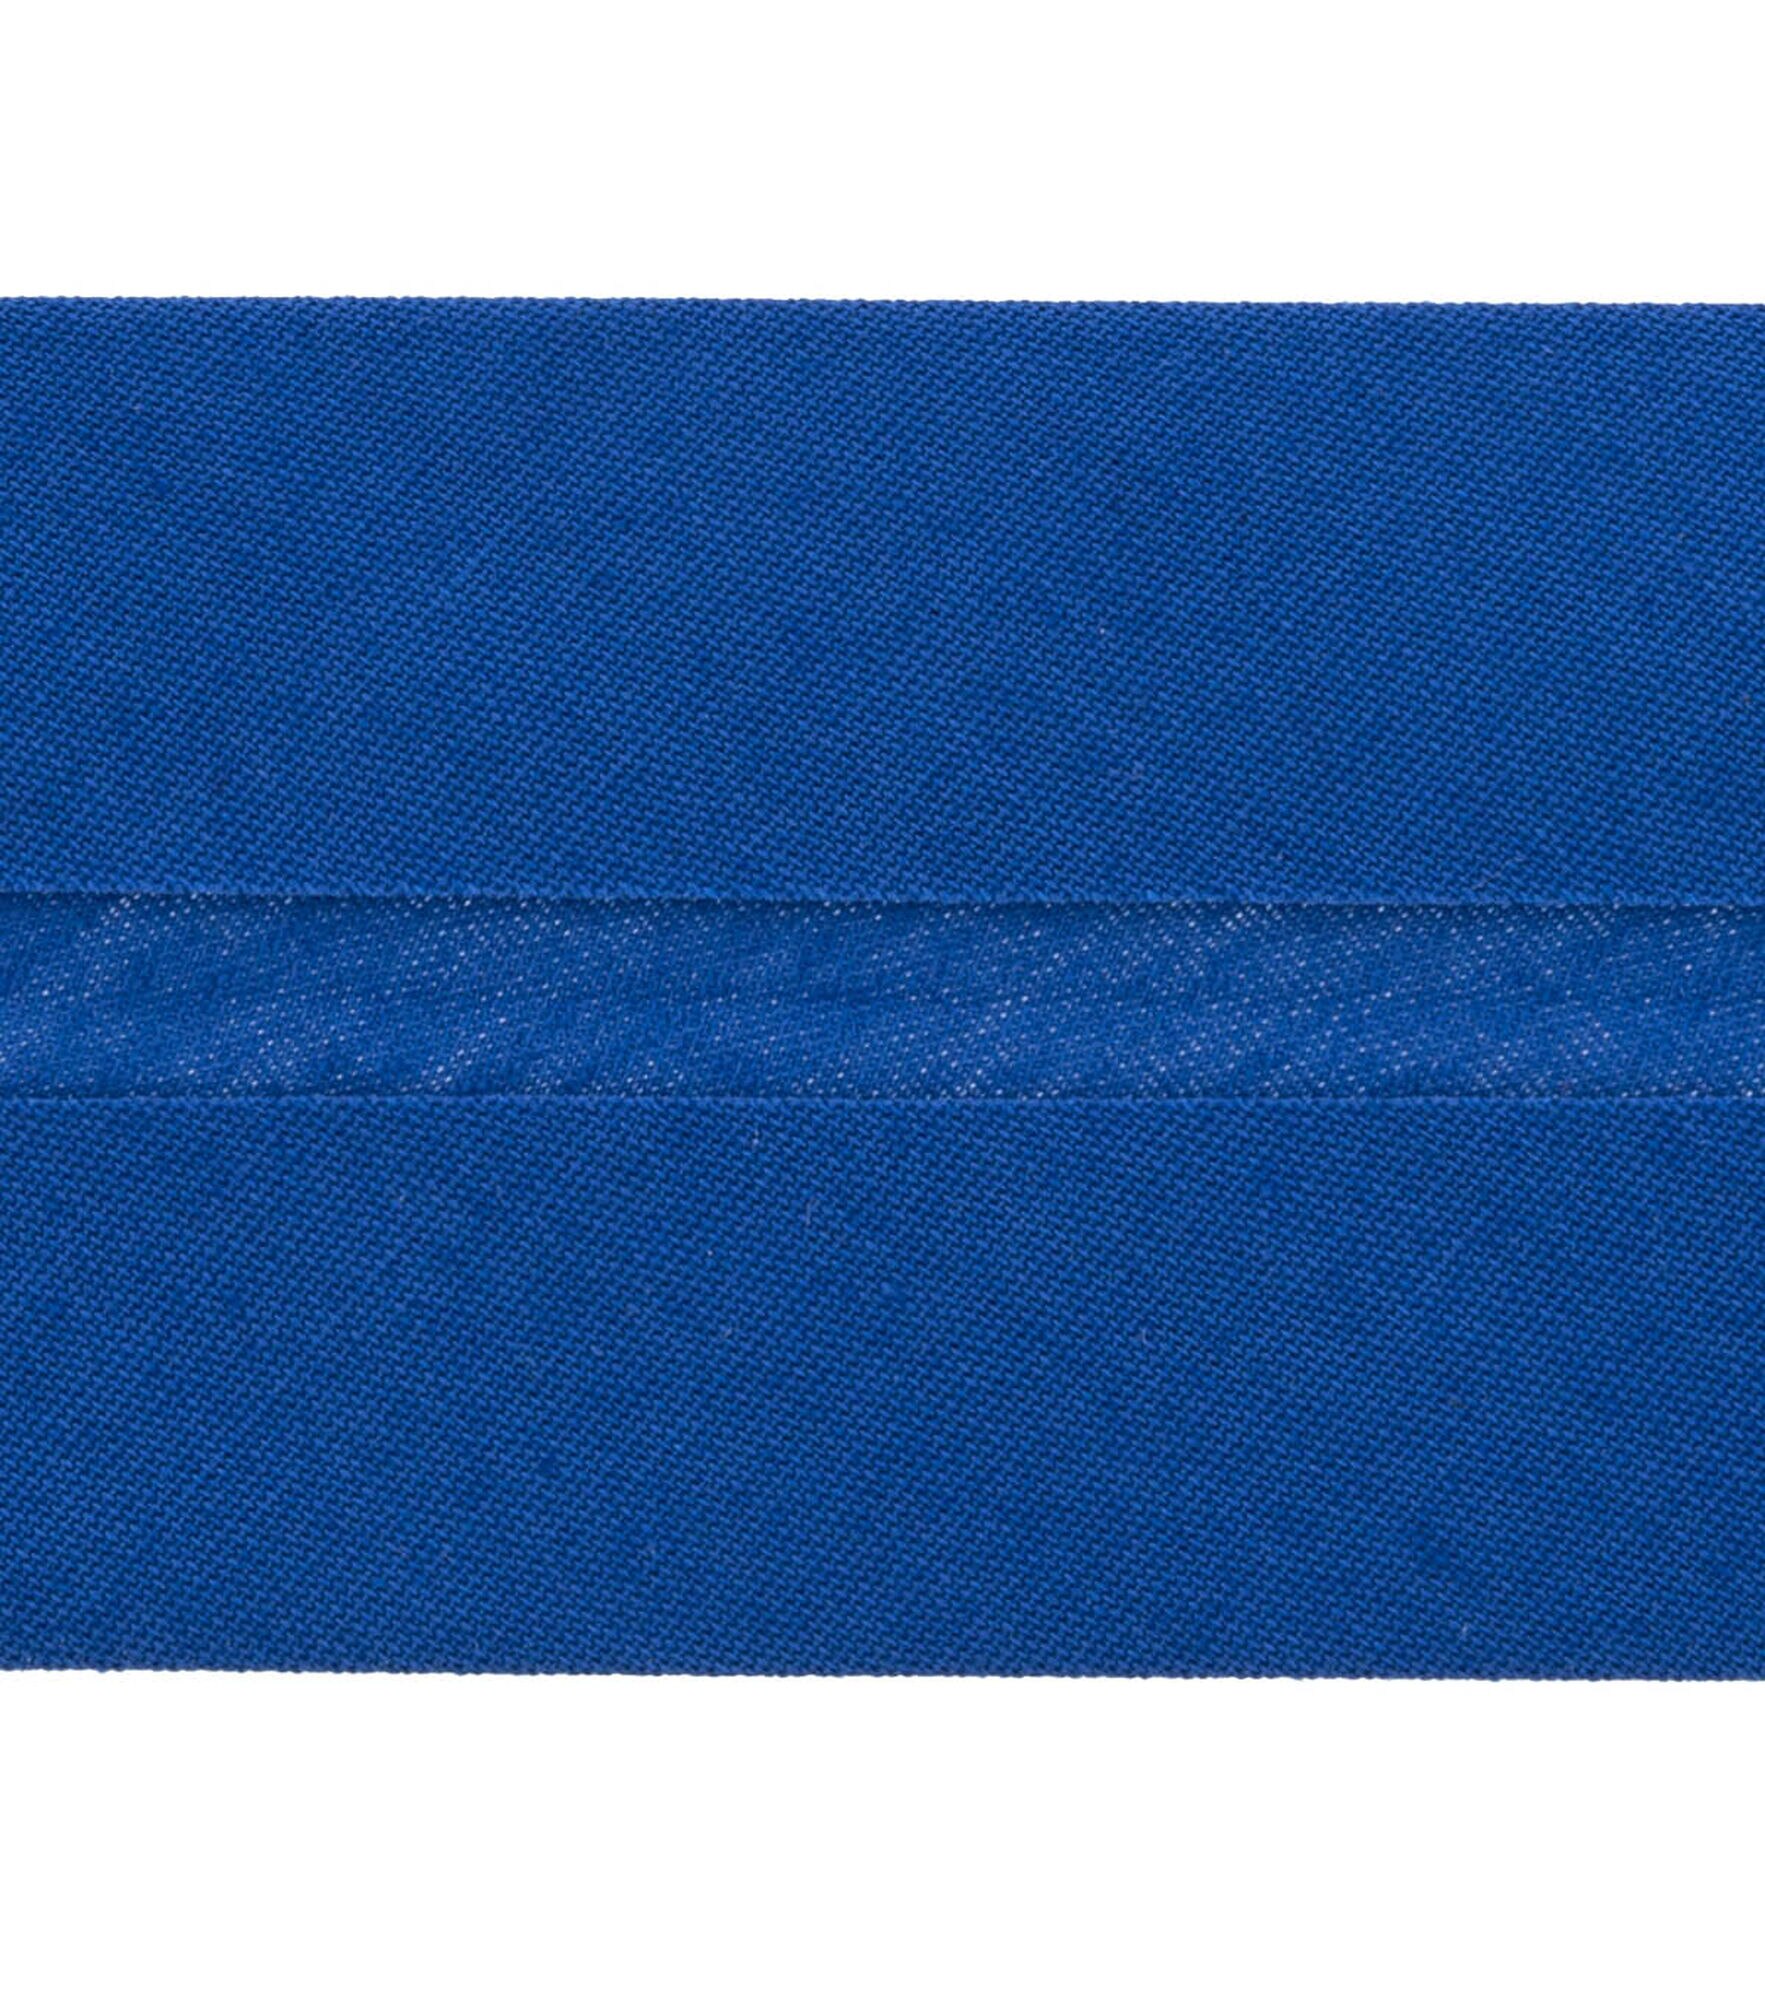 Wrights 7/8" x 3yd Double Fold Quilt Binding, Snorkel Blue, hi-res